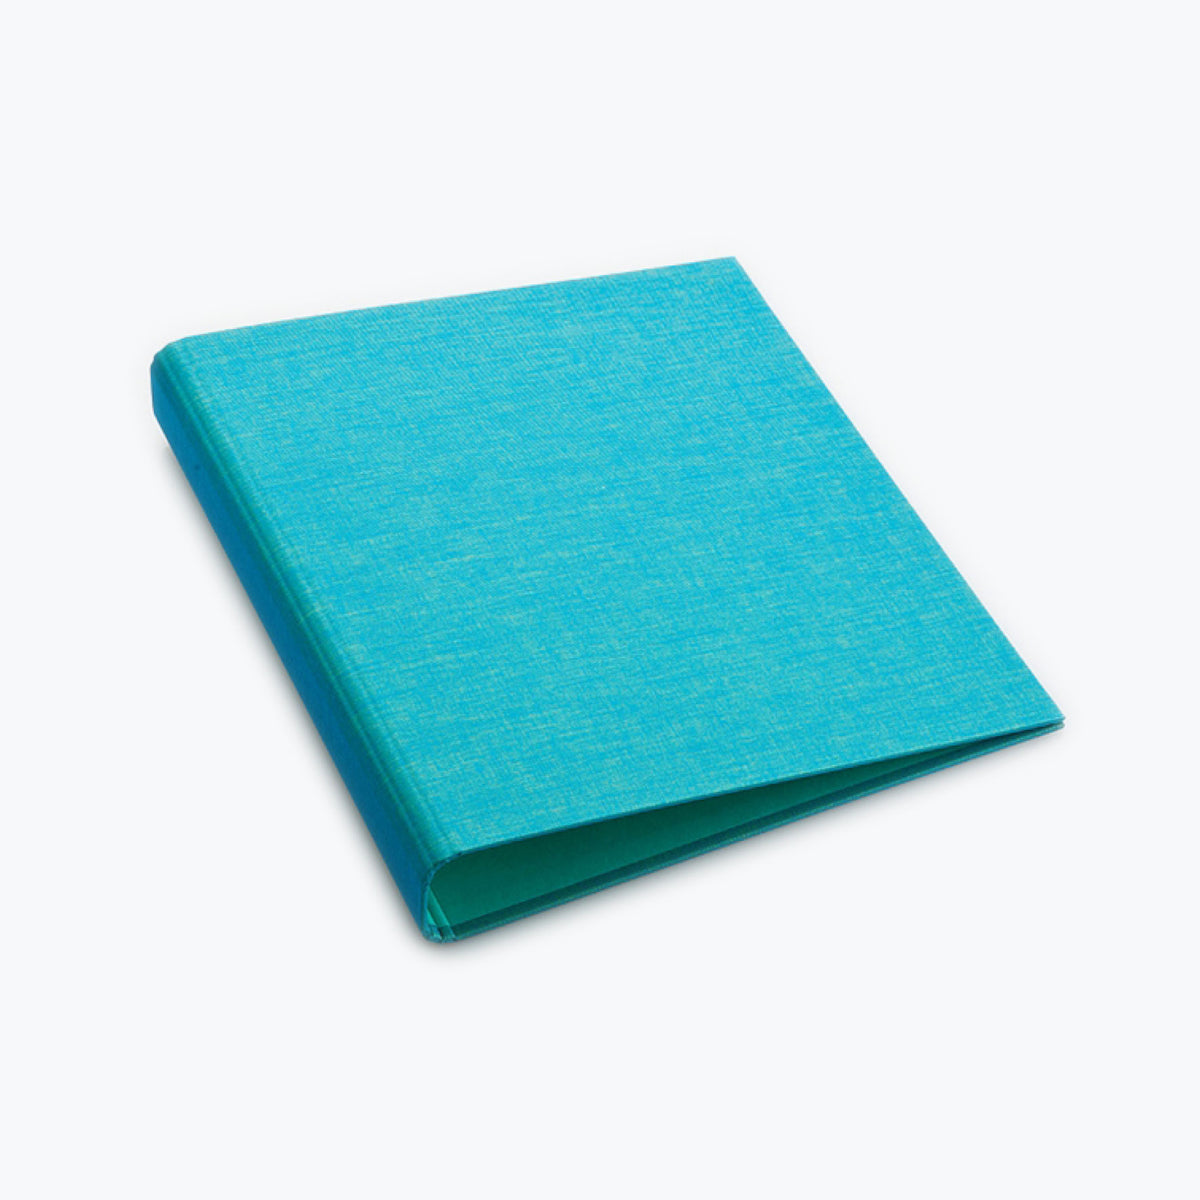 Bookbinders Design - Cloth Ringbinder - A4 - Turquoise [Minor Damage]